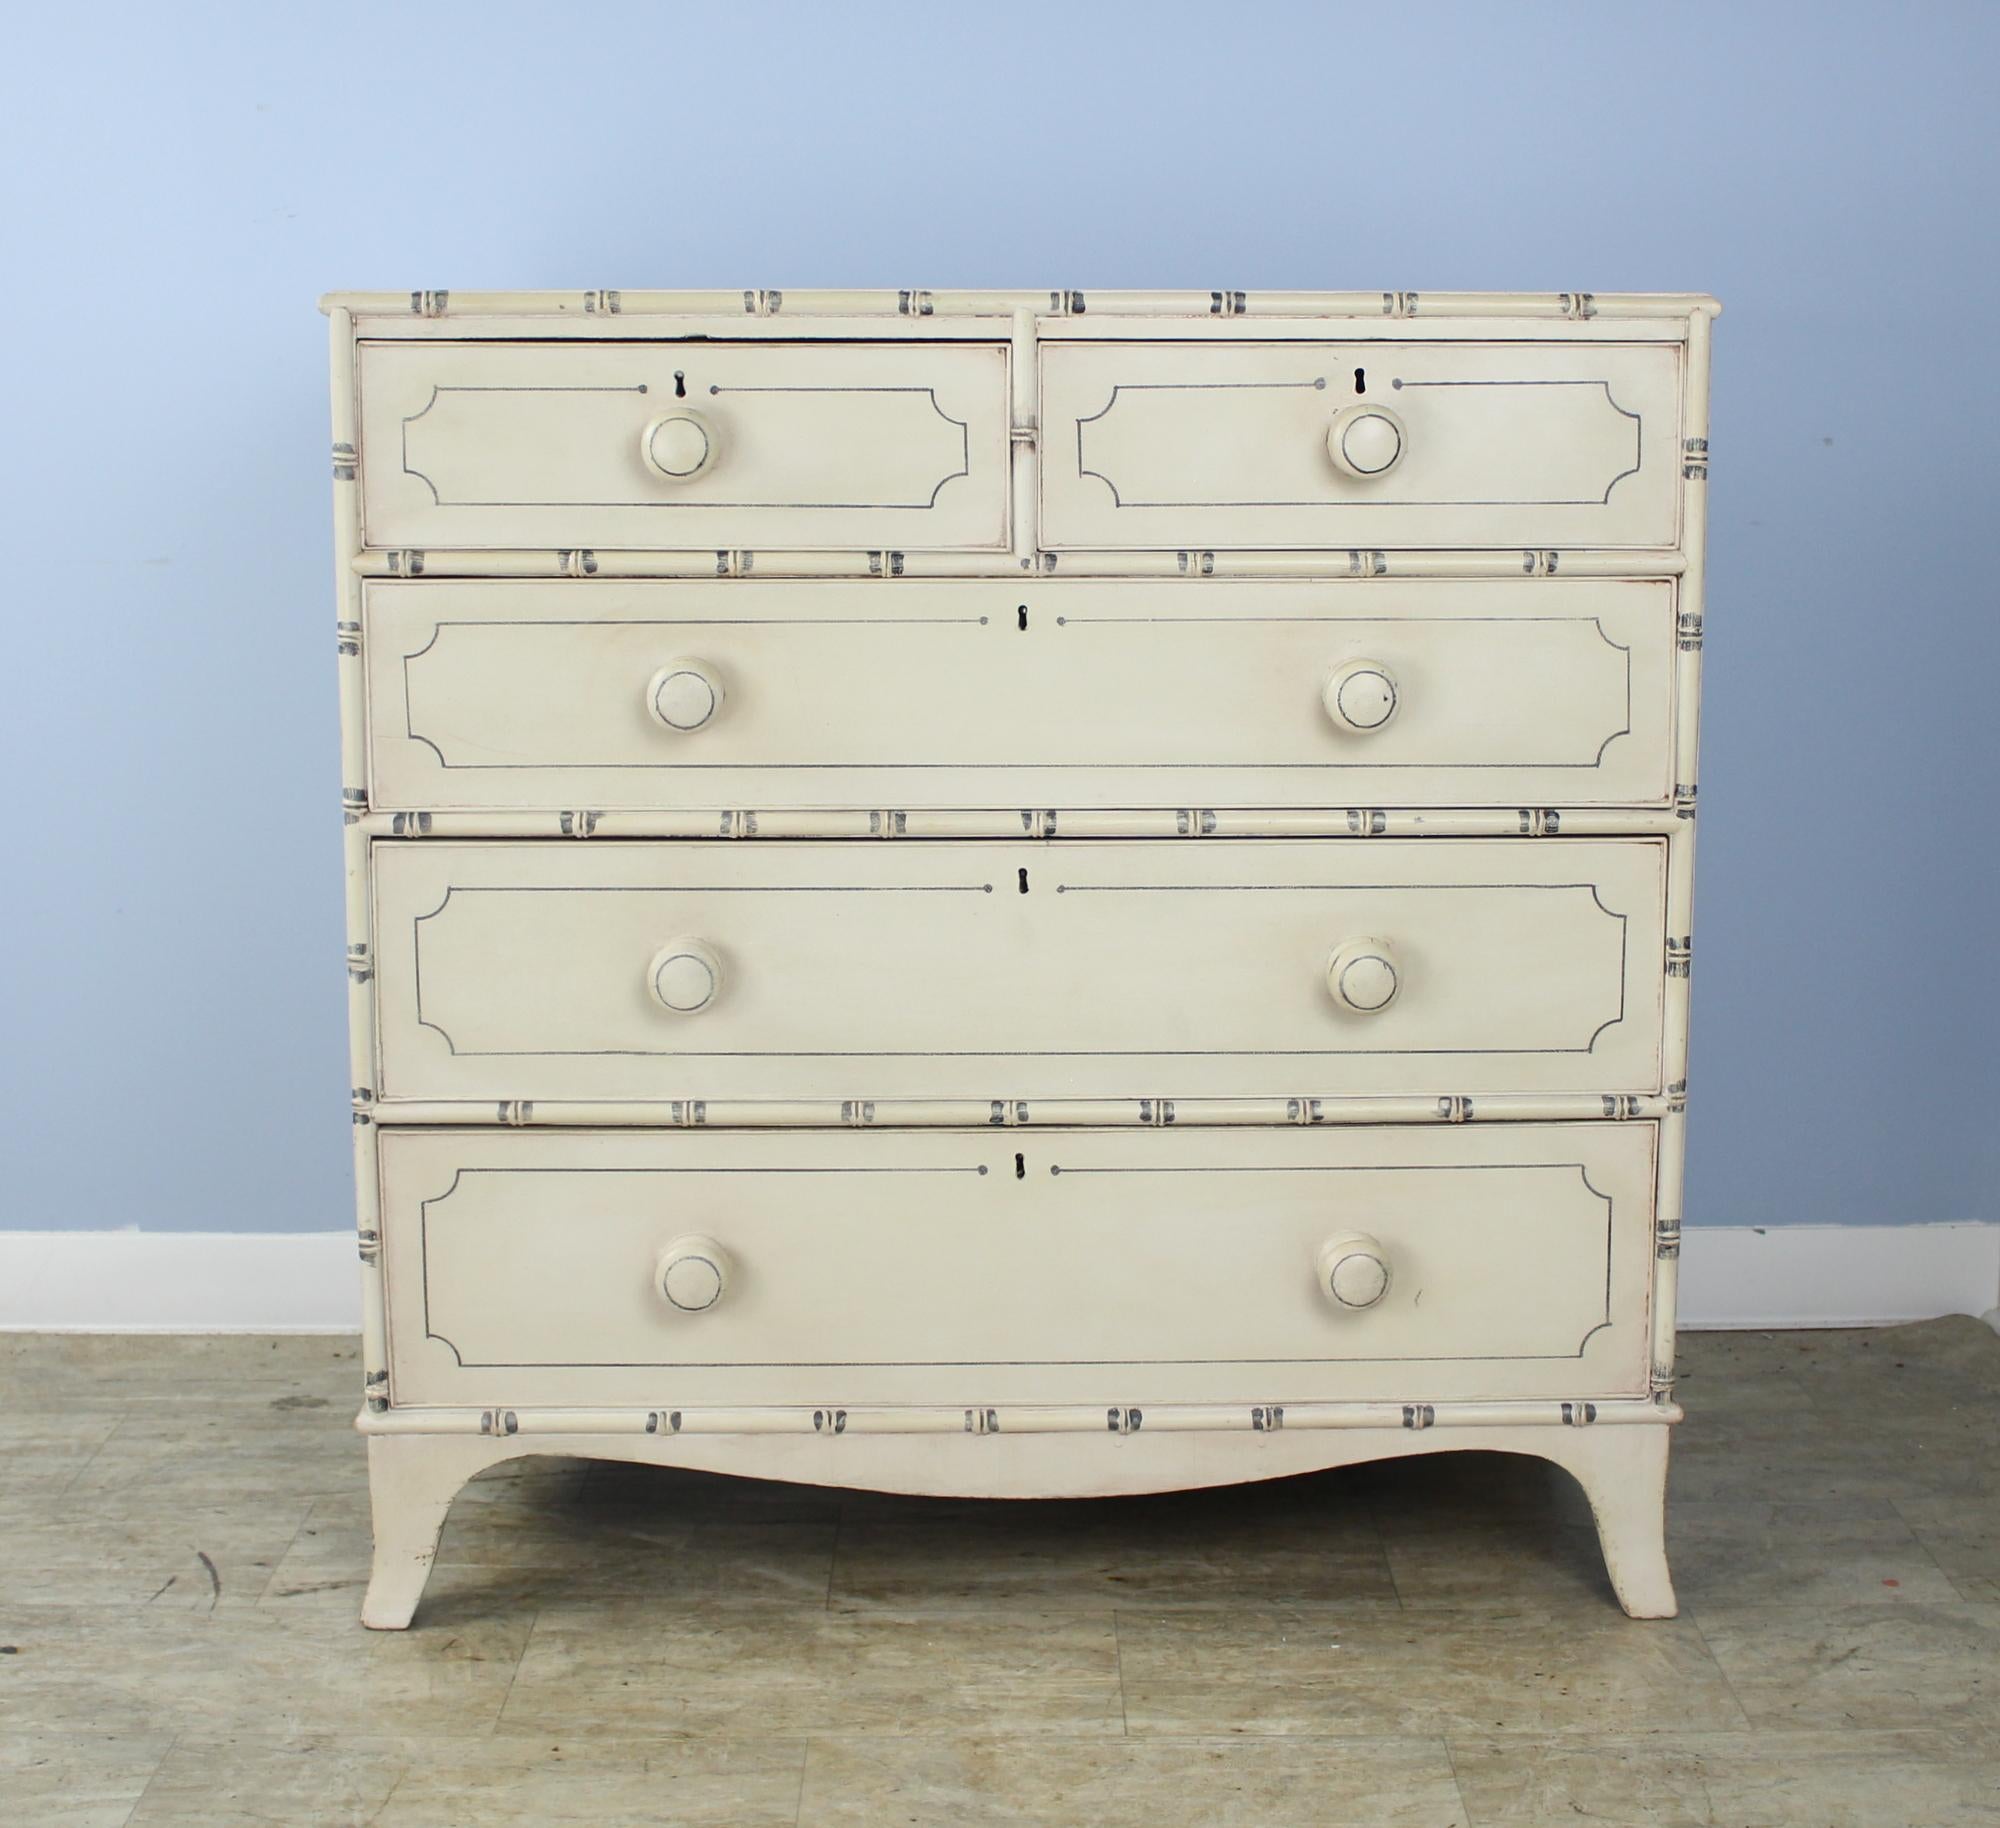 A charming Regency chest of drawers with bamboo detail, newly painted in an antique cream with small areas of faux distress. Perfectly suited to a beach cottage, child's room or guest room. Roomy drawers open and shut easily. Painted over original